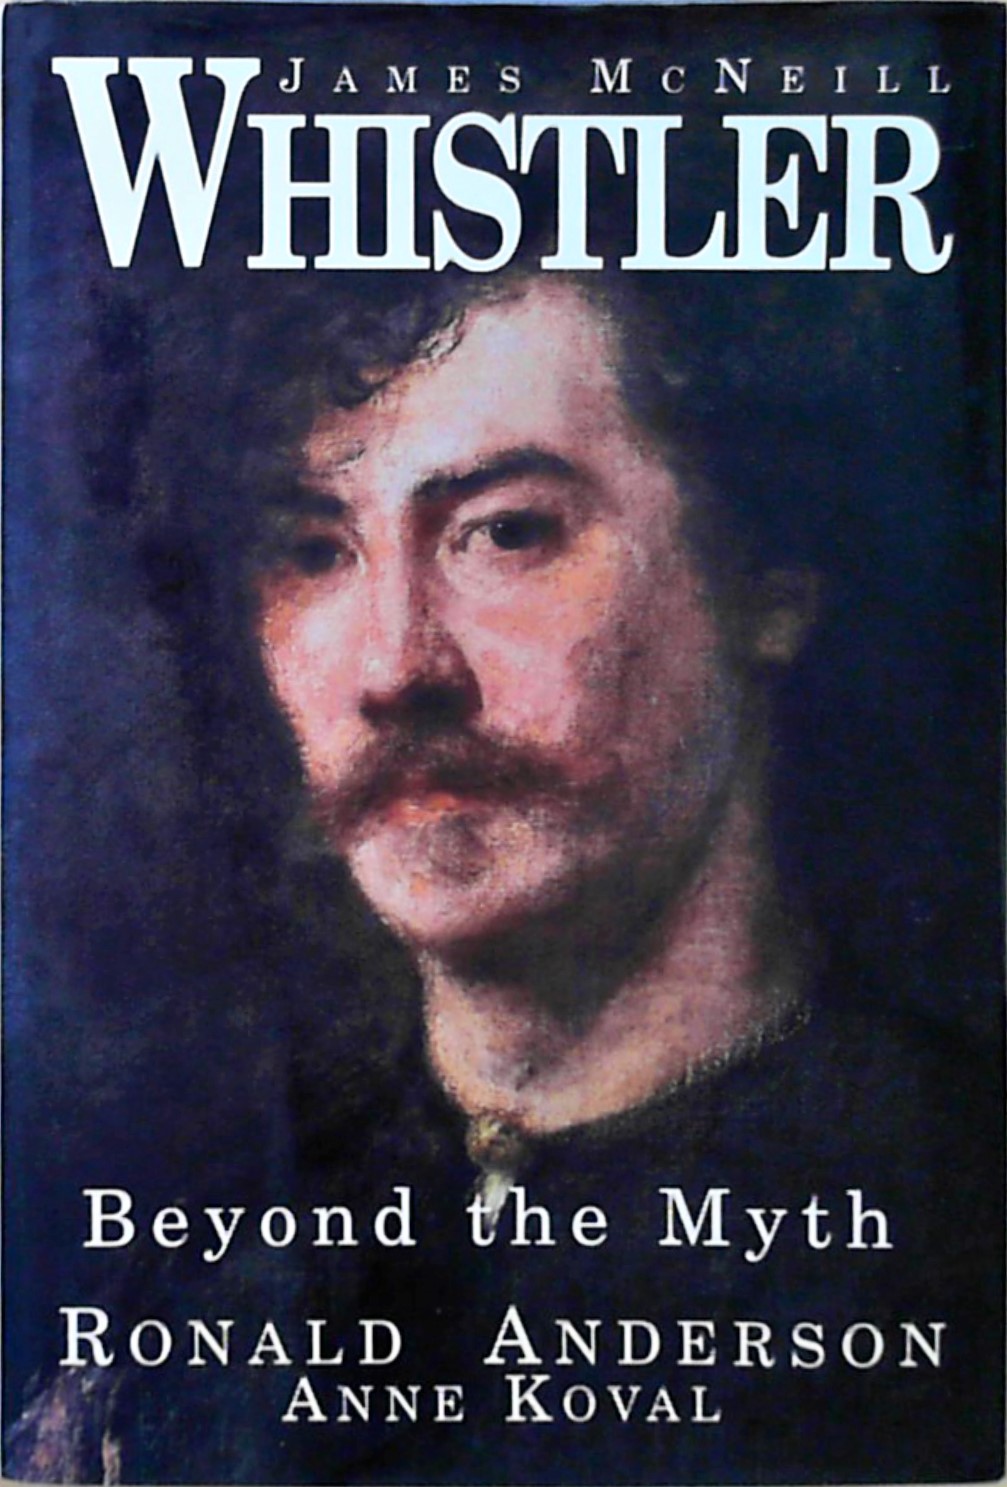 James McNeill Whistler: Beyond the Myth - Anderson, Ronald and Anne Koval